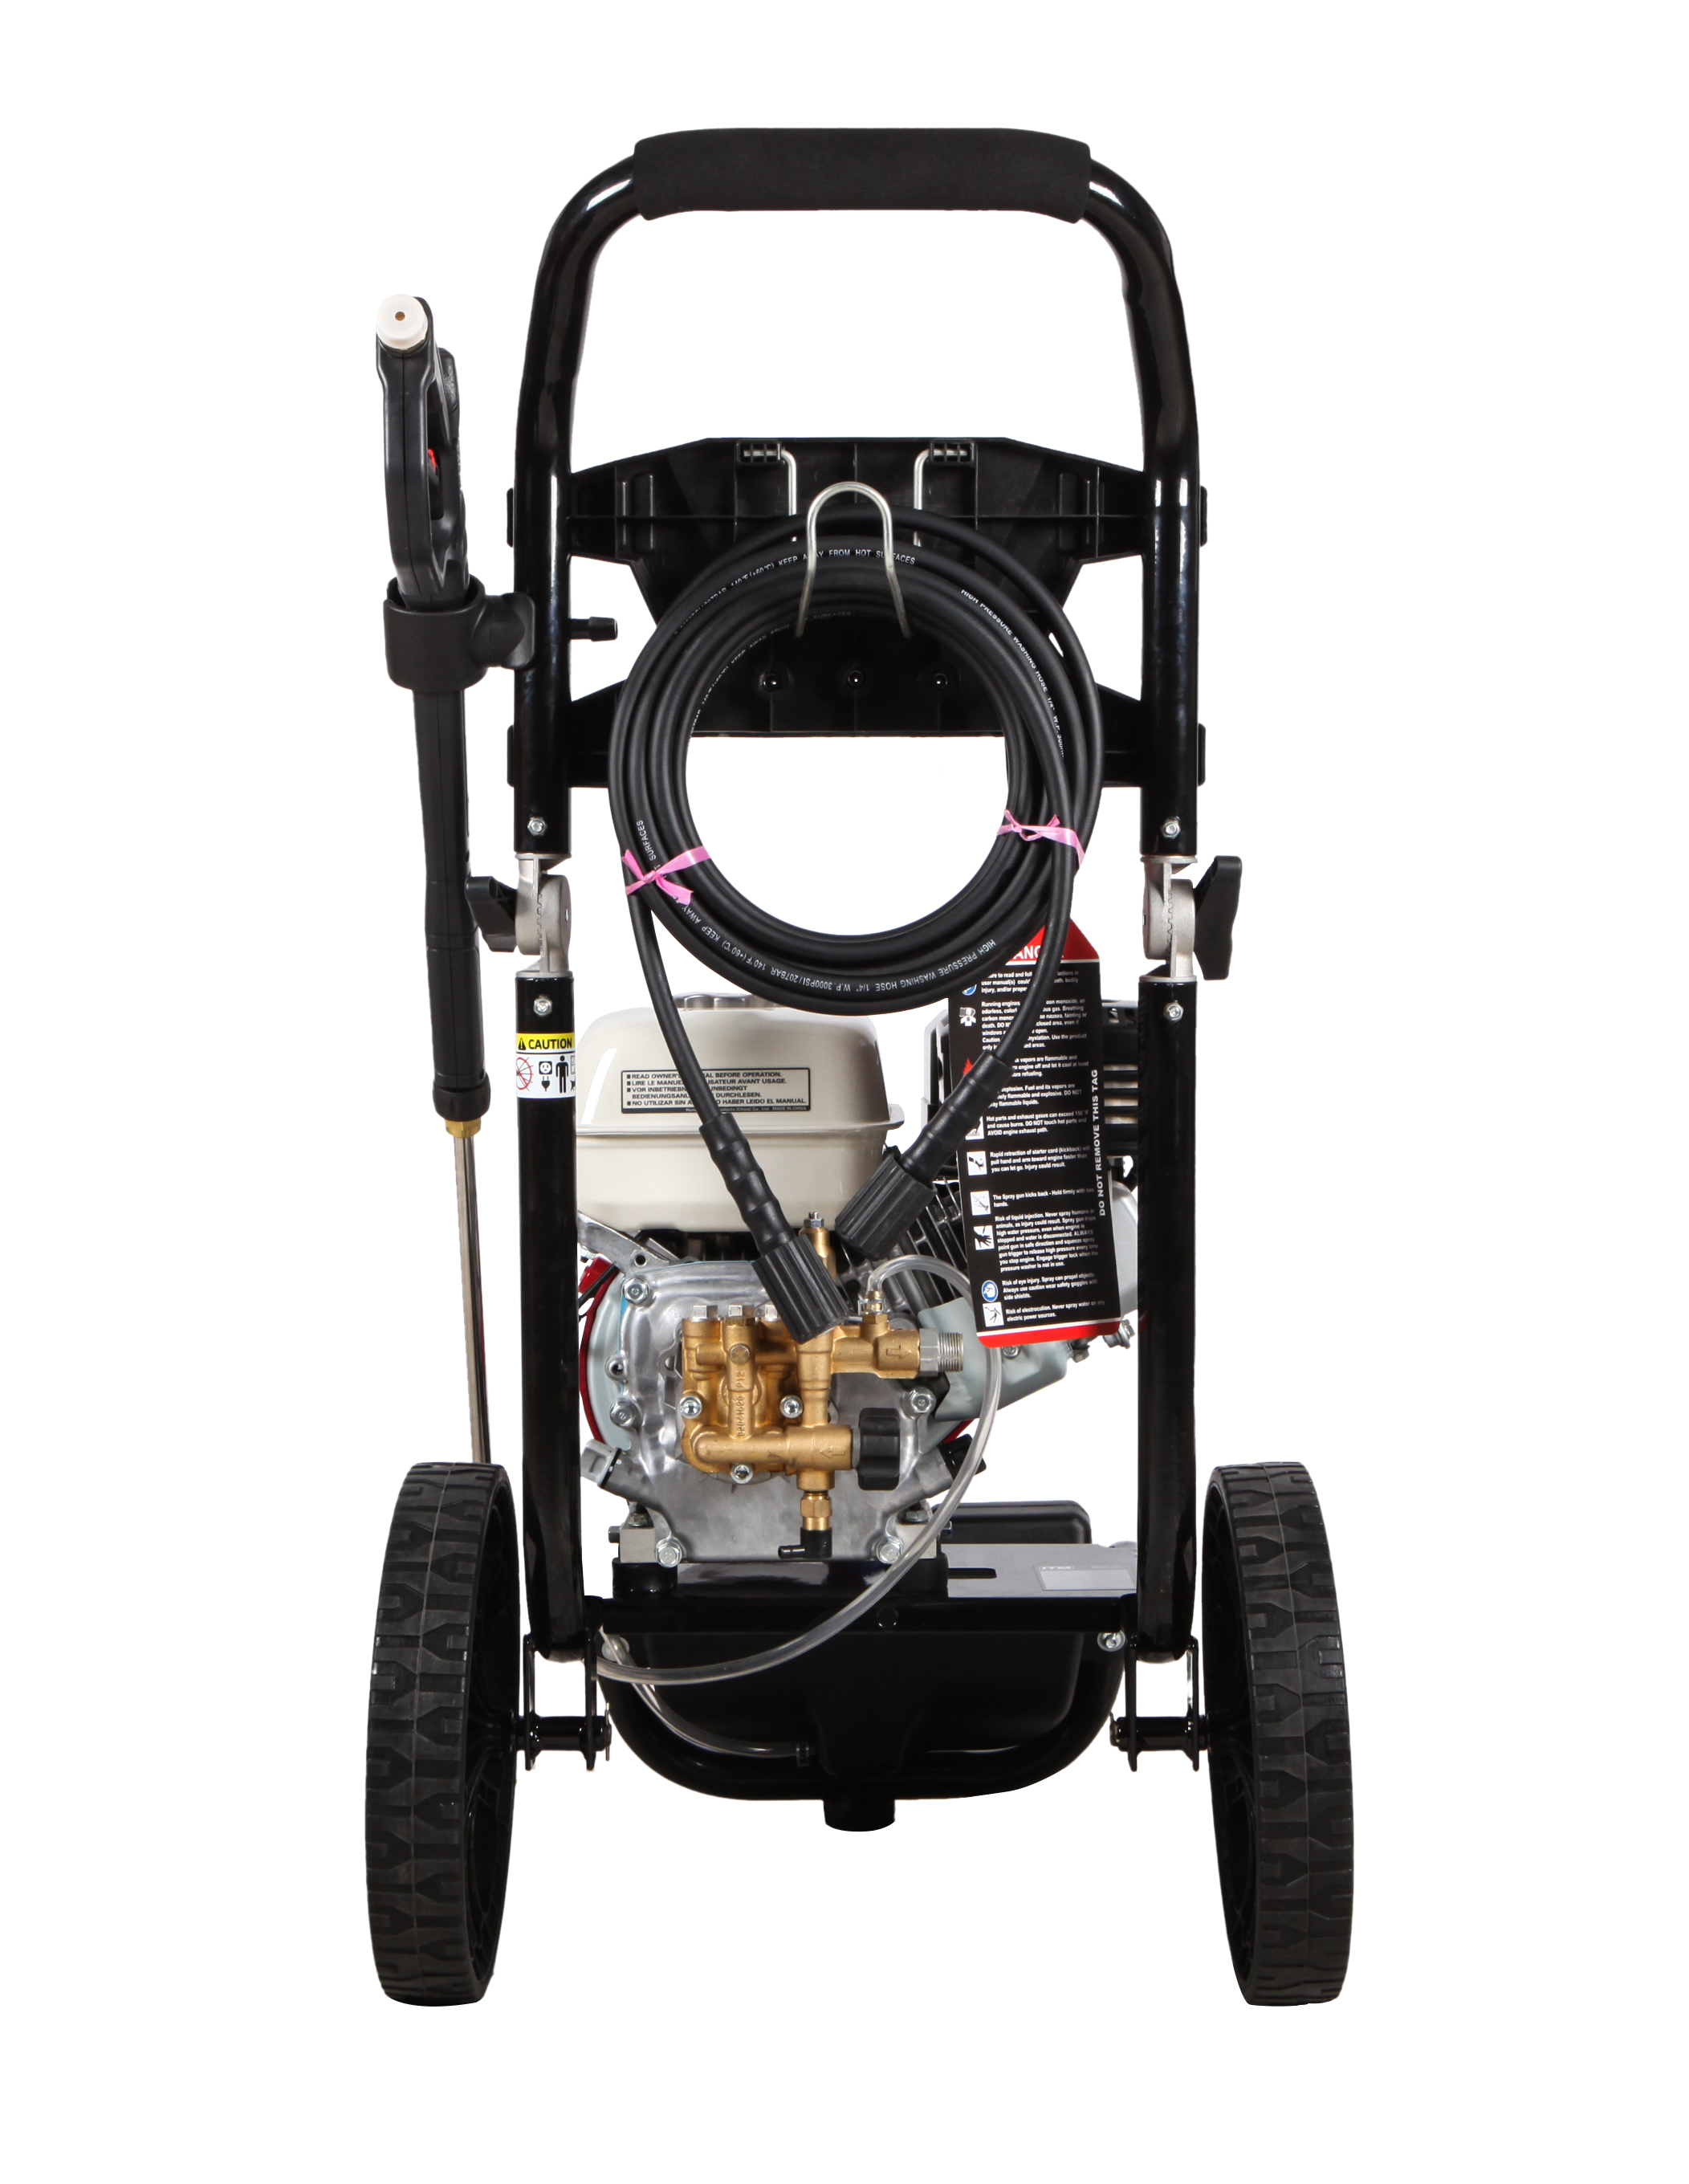  Fullas FPGPW3200H-F 3200PSI 220bar Gasoline High Pressure Washer Powered by HONDA G200